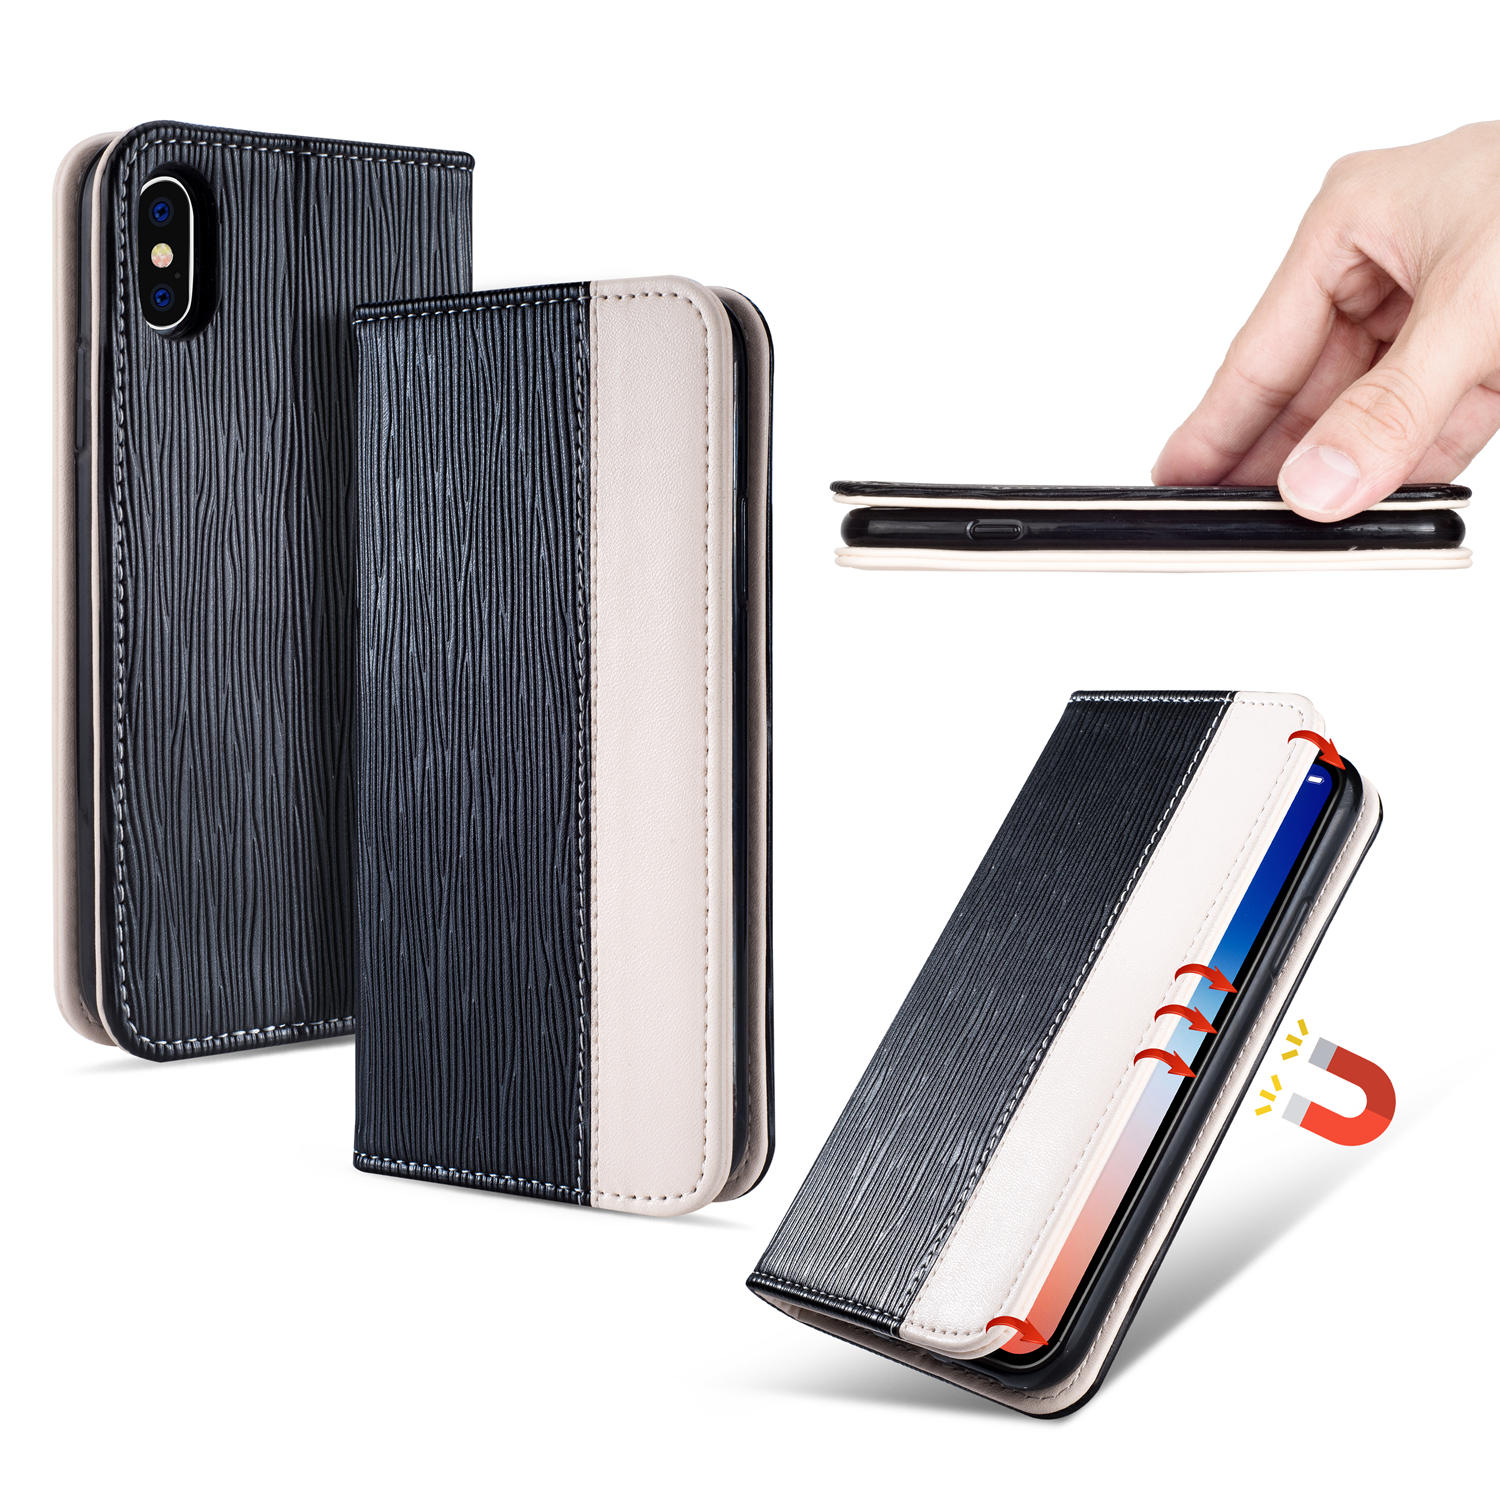 Bakeey Premium Magnetic Flip Card Slot Kickstand Protective Case For iPhone X